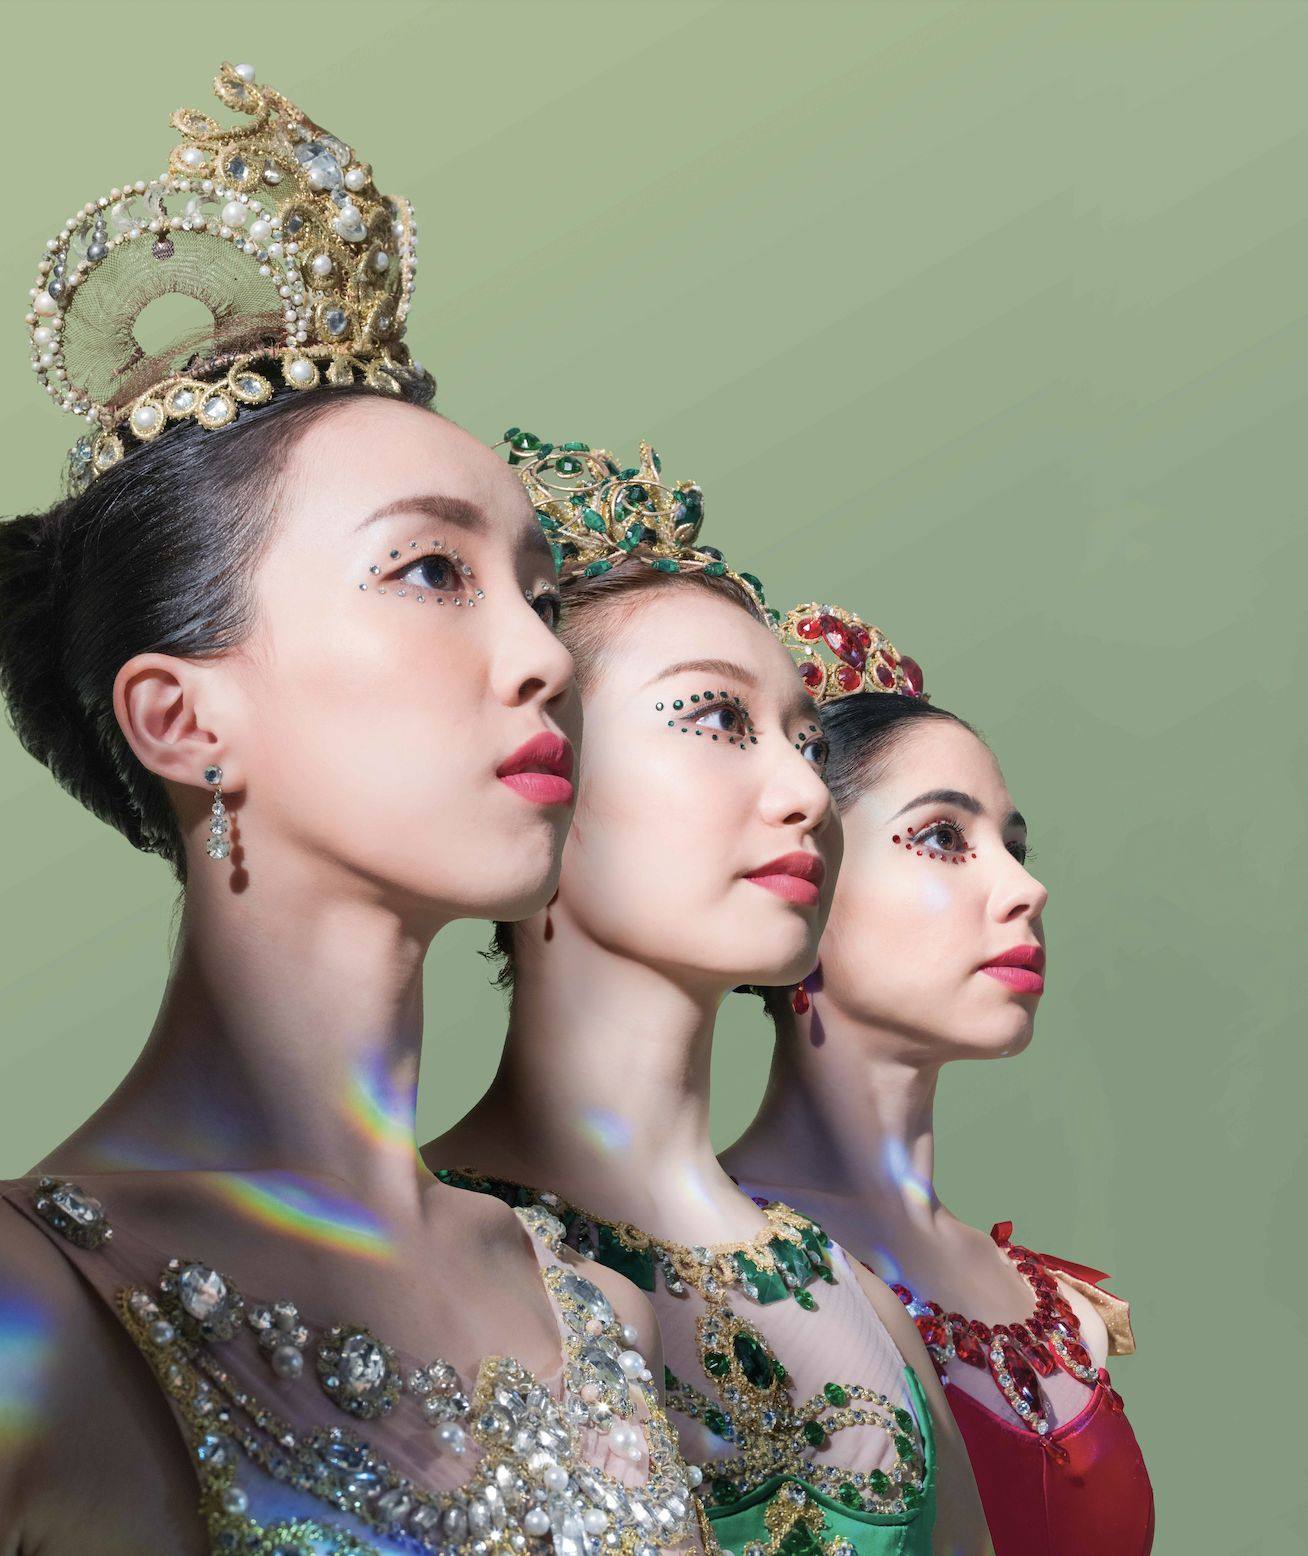 Van Cleef & Arpels is supporting a performance of Jewels by the Hong Kong Ballet from May 21-23. Photo: HK Ballet